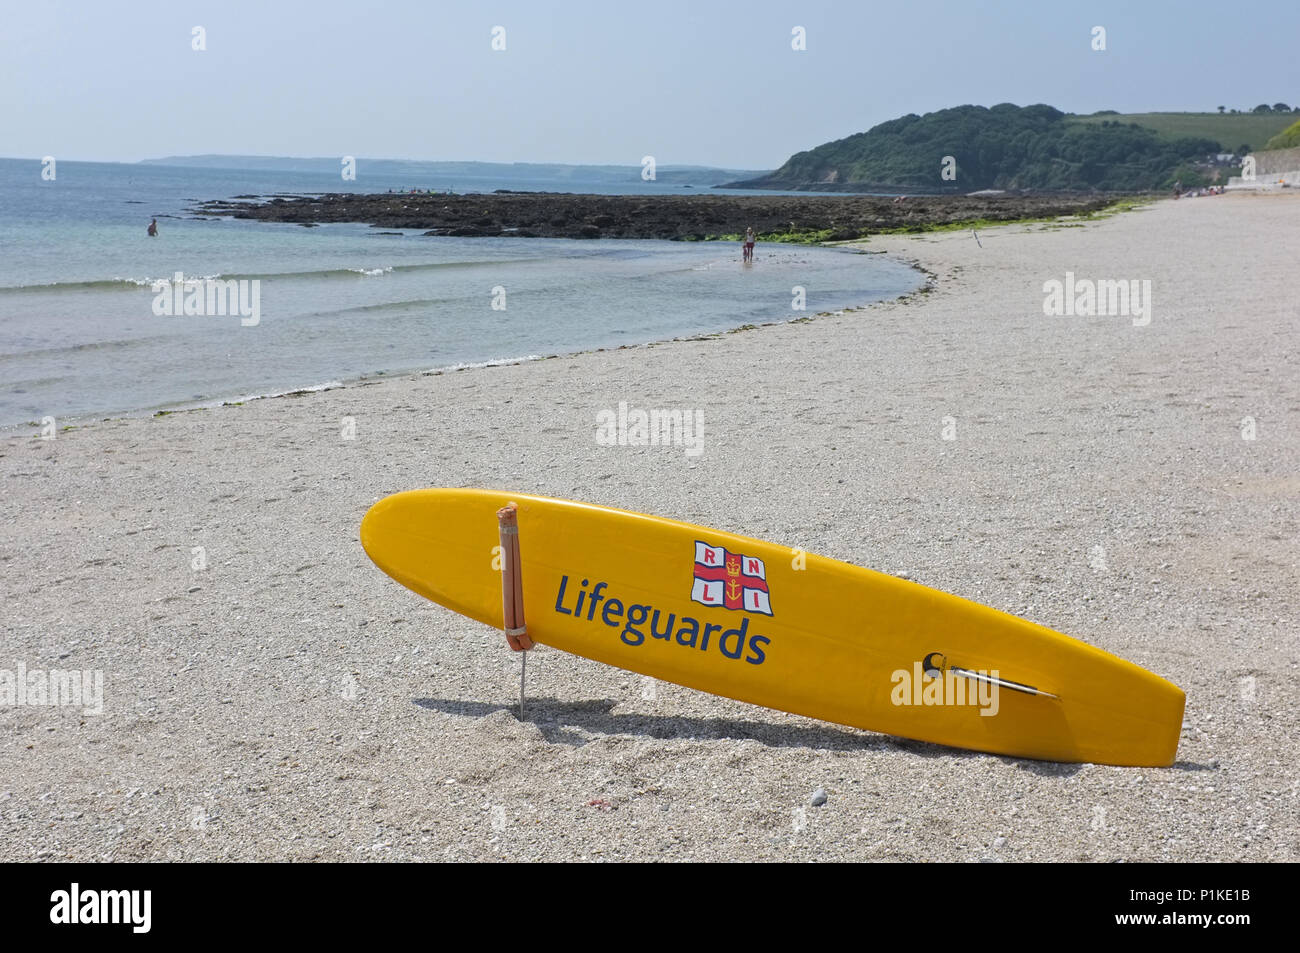 RNLI lifeguards sign on a surfboard Stock Photo